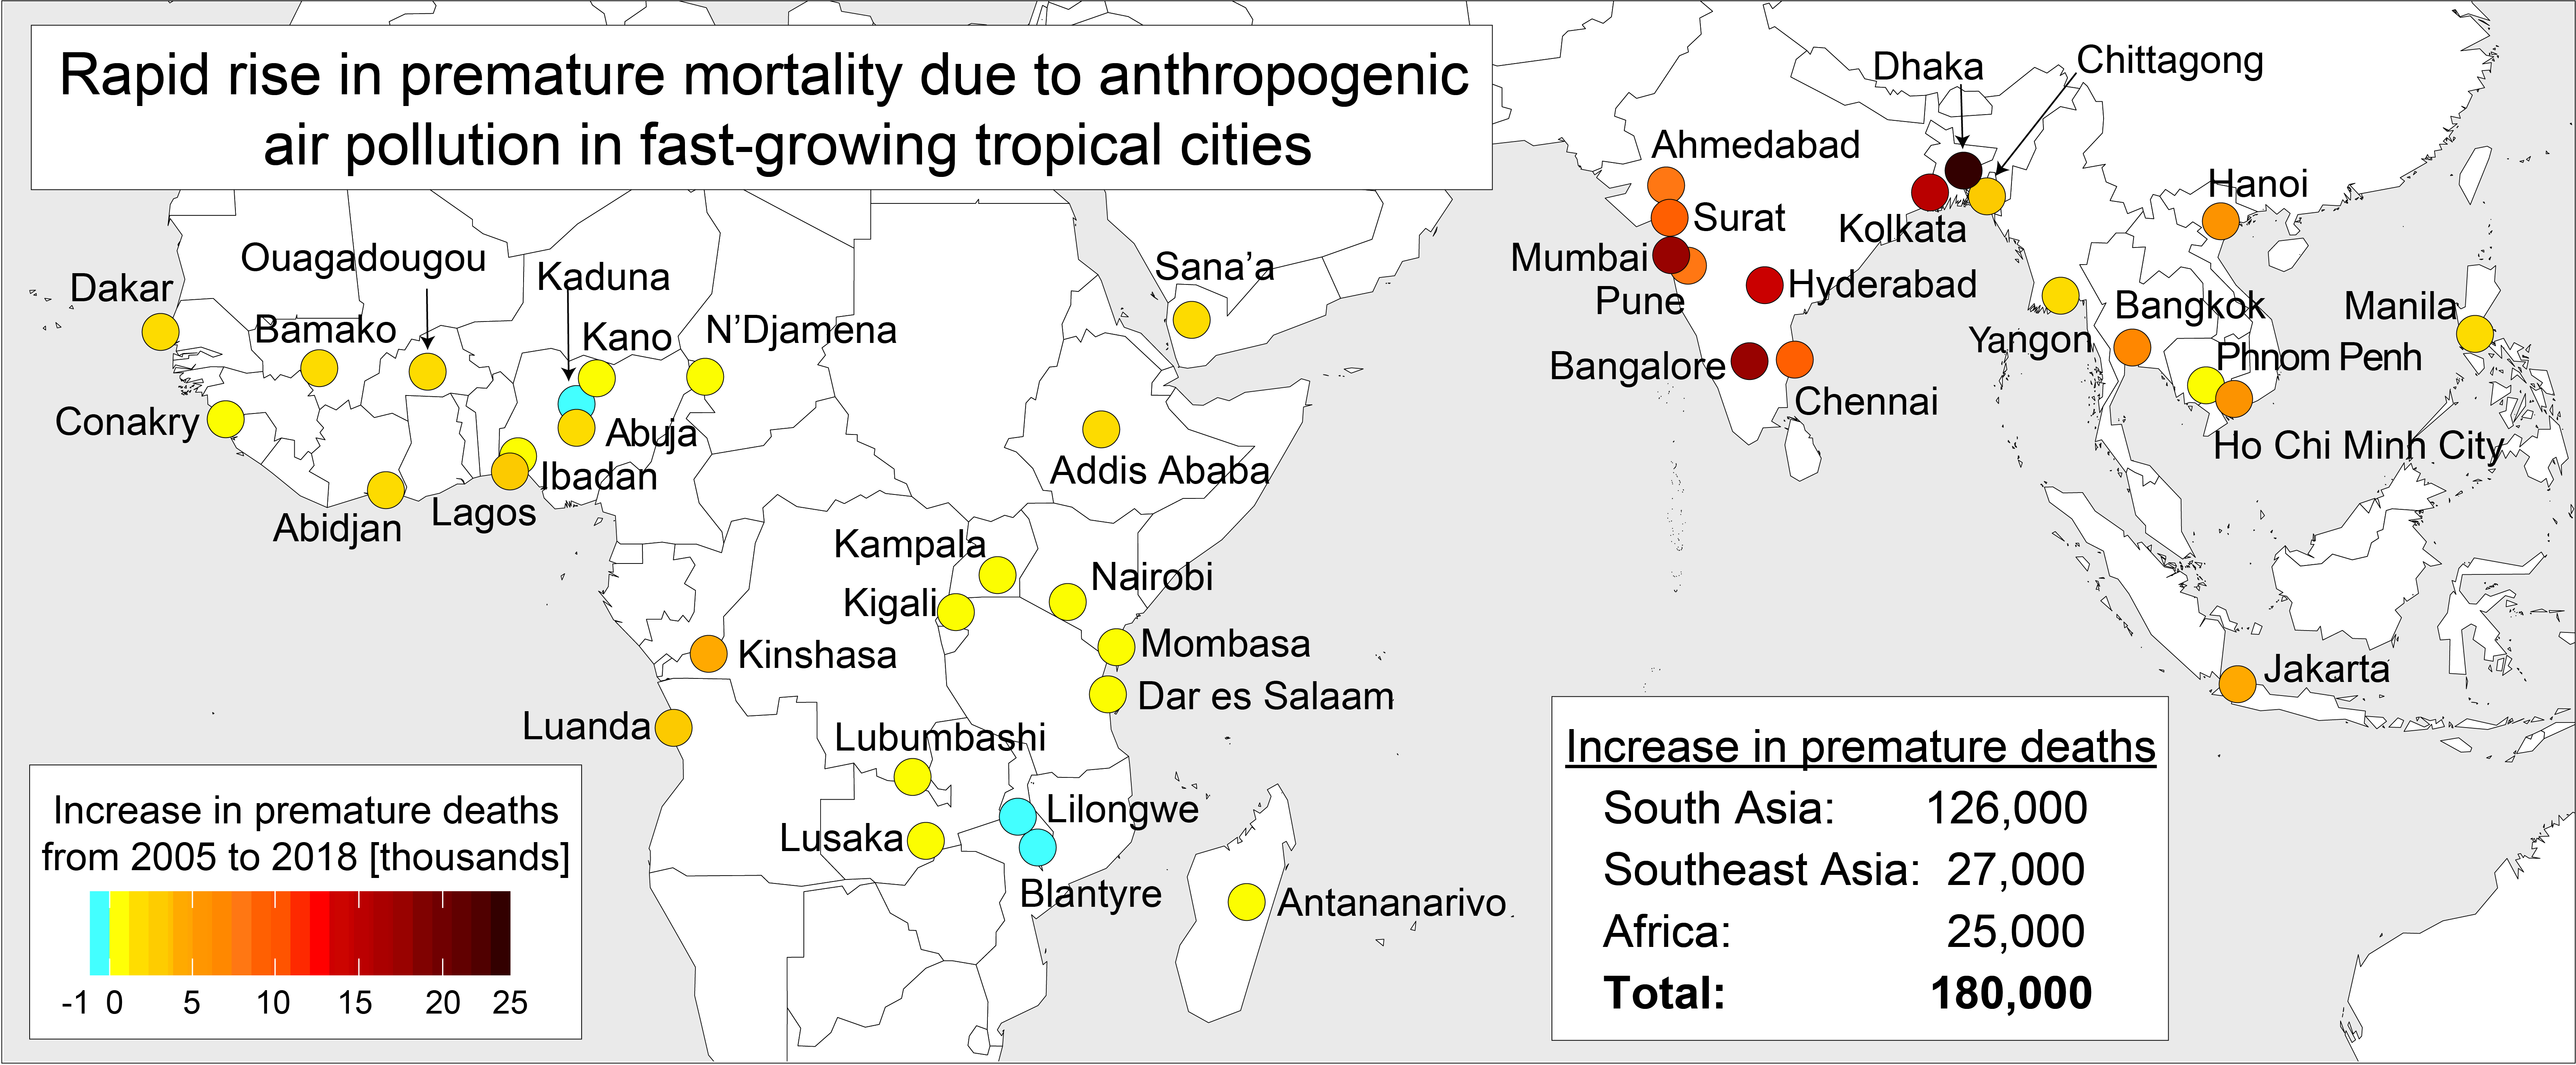 Premature deaths in fast-growing tropical cities from exposure to air pollution